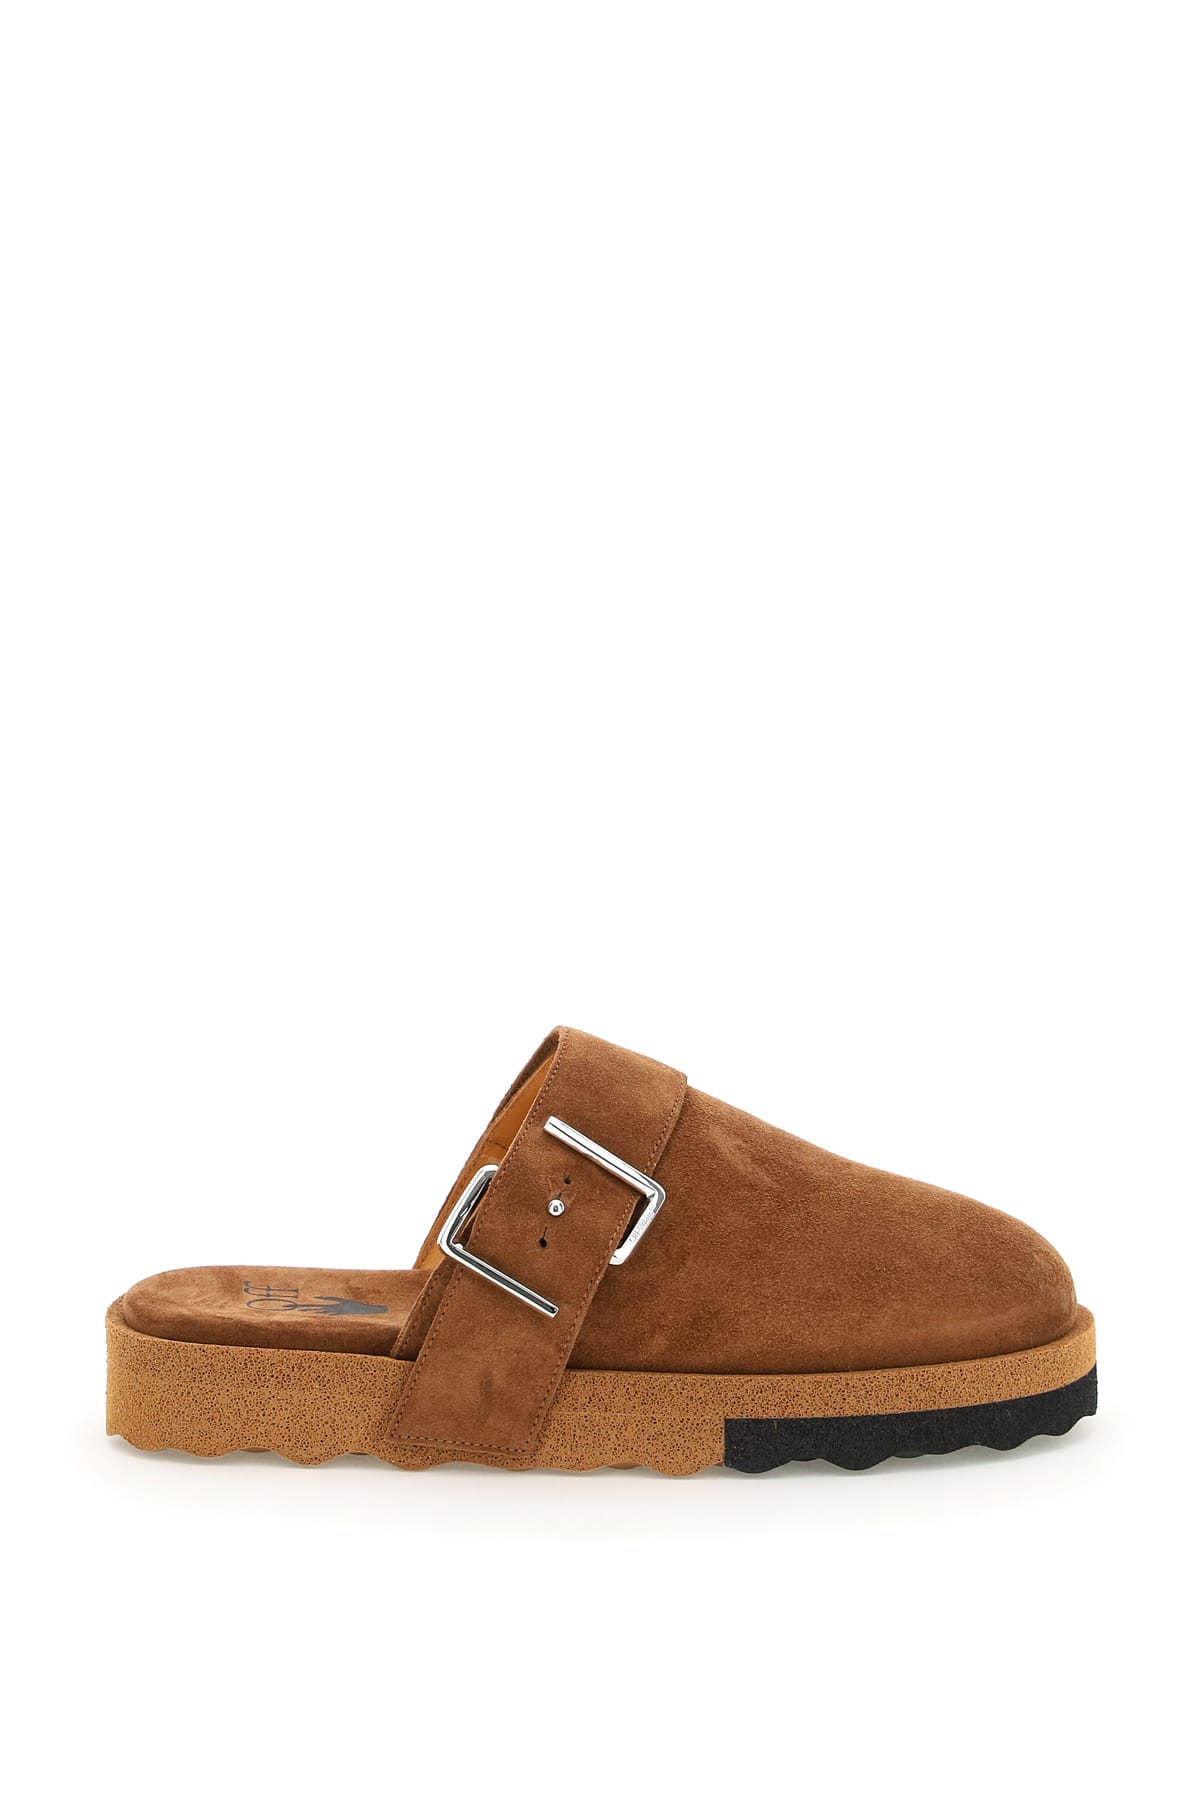 Off-White Comfort Suede Slippers